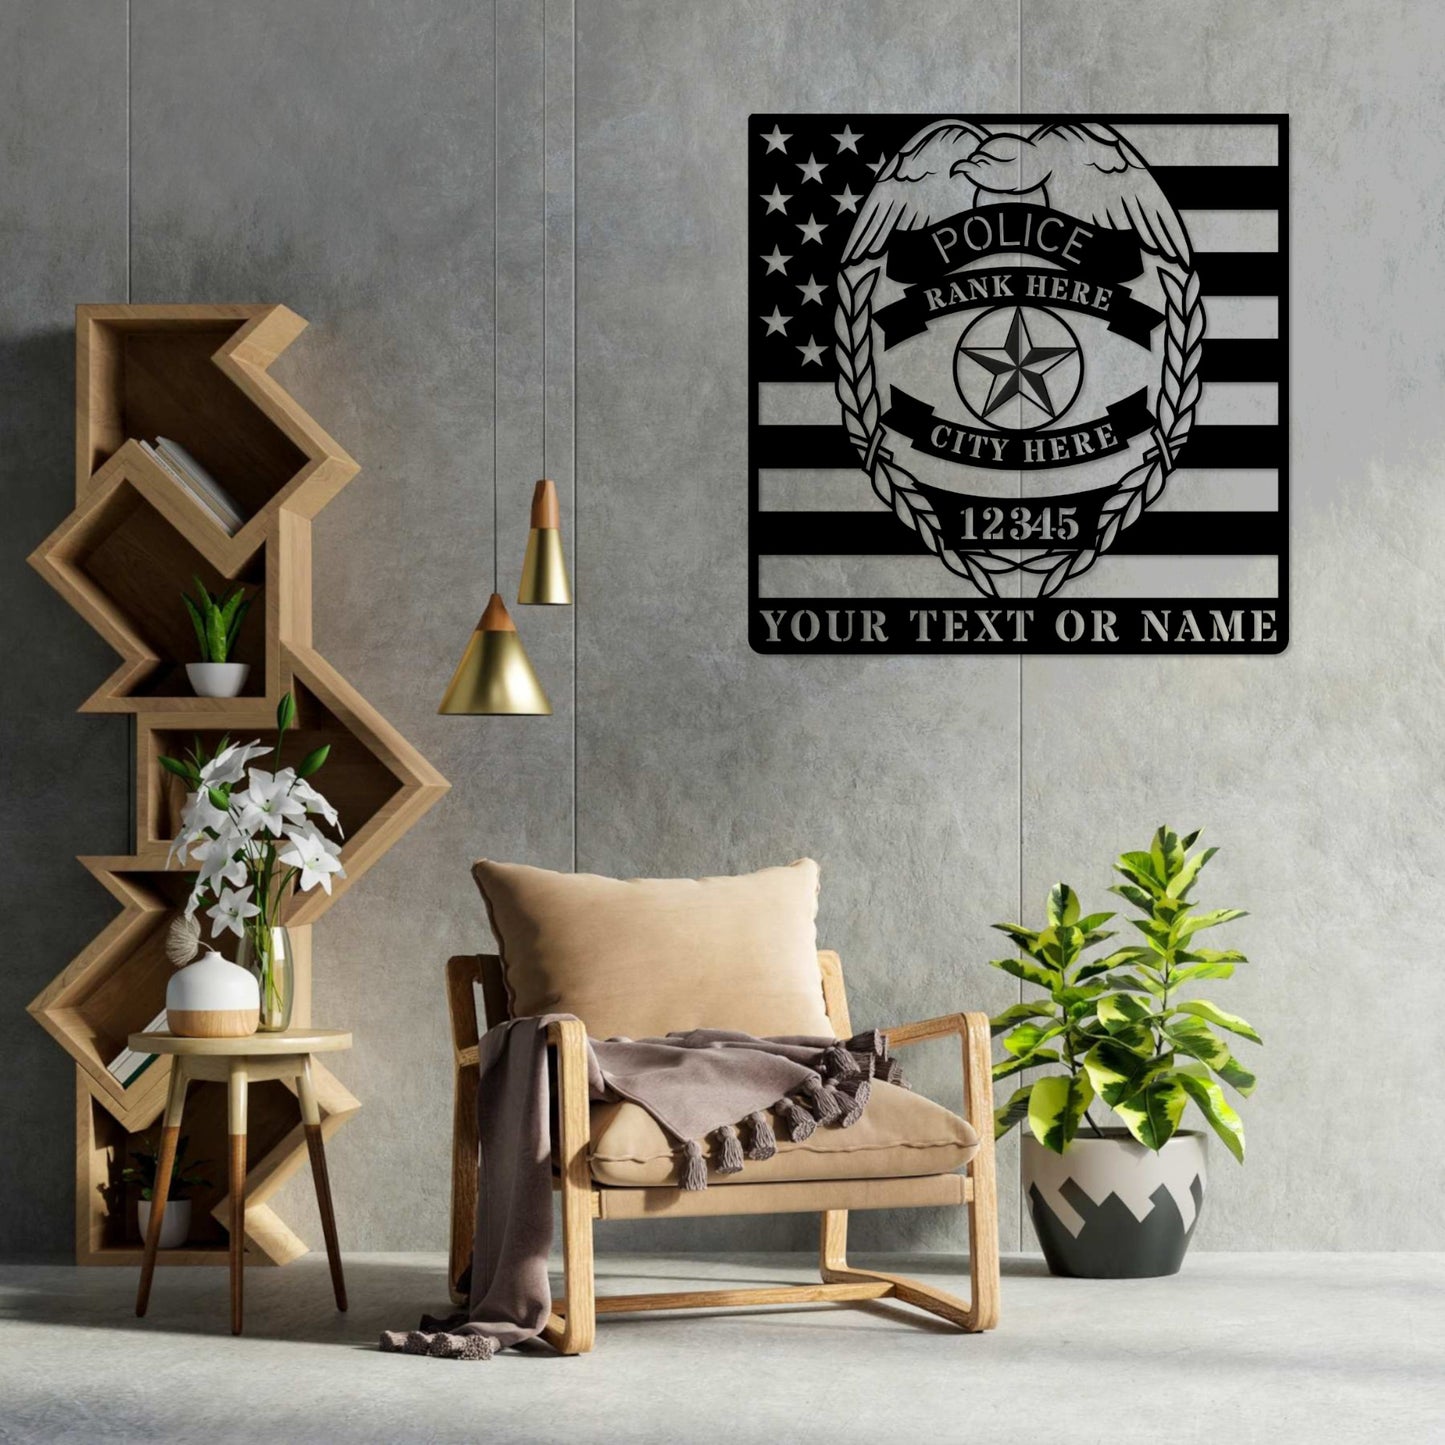 Personalized Police Badge Name Metal Sign Gift. Customizable Police Force Wall Decor. Police Officer Gift. Police Lieutenant Badge. Cop Gift